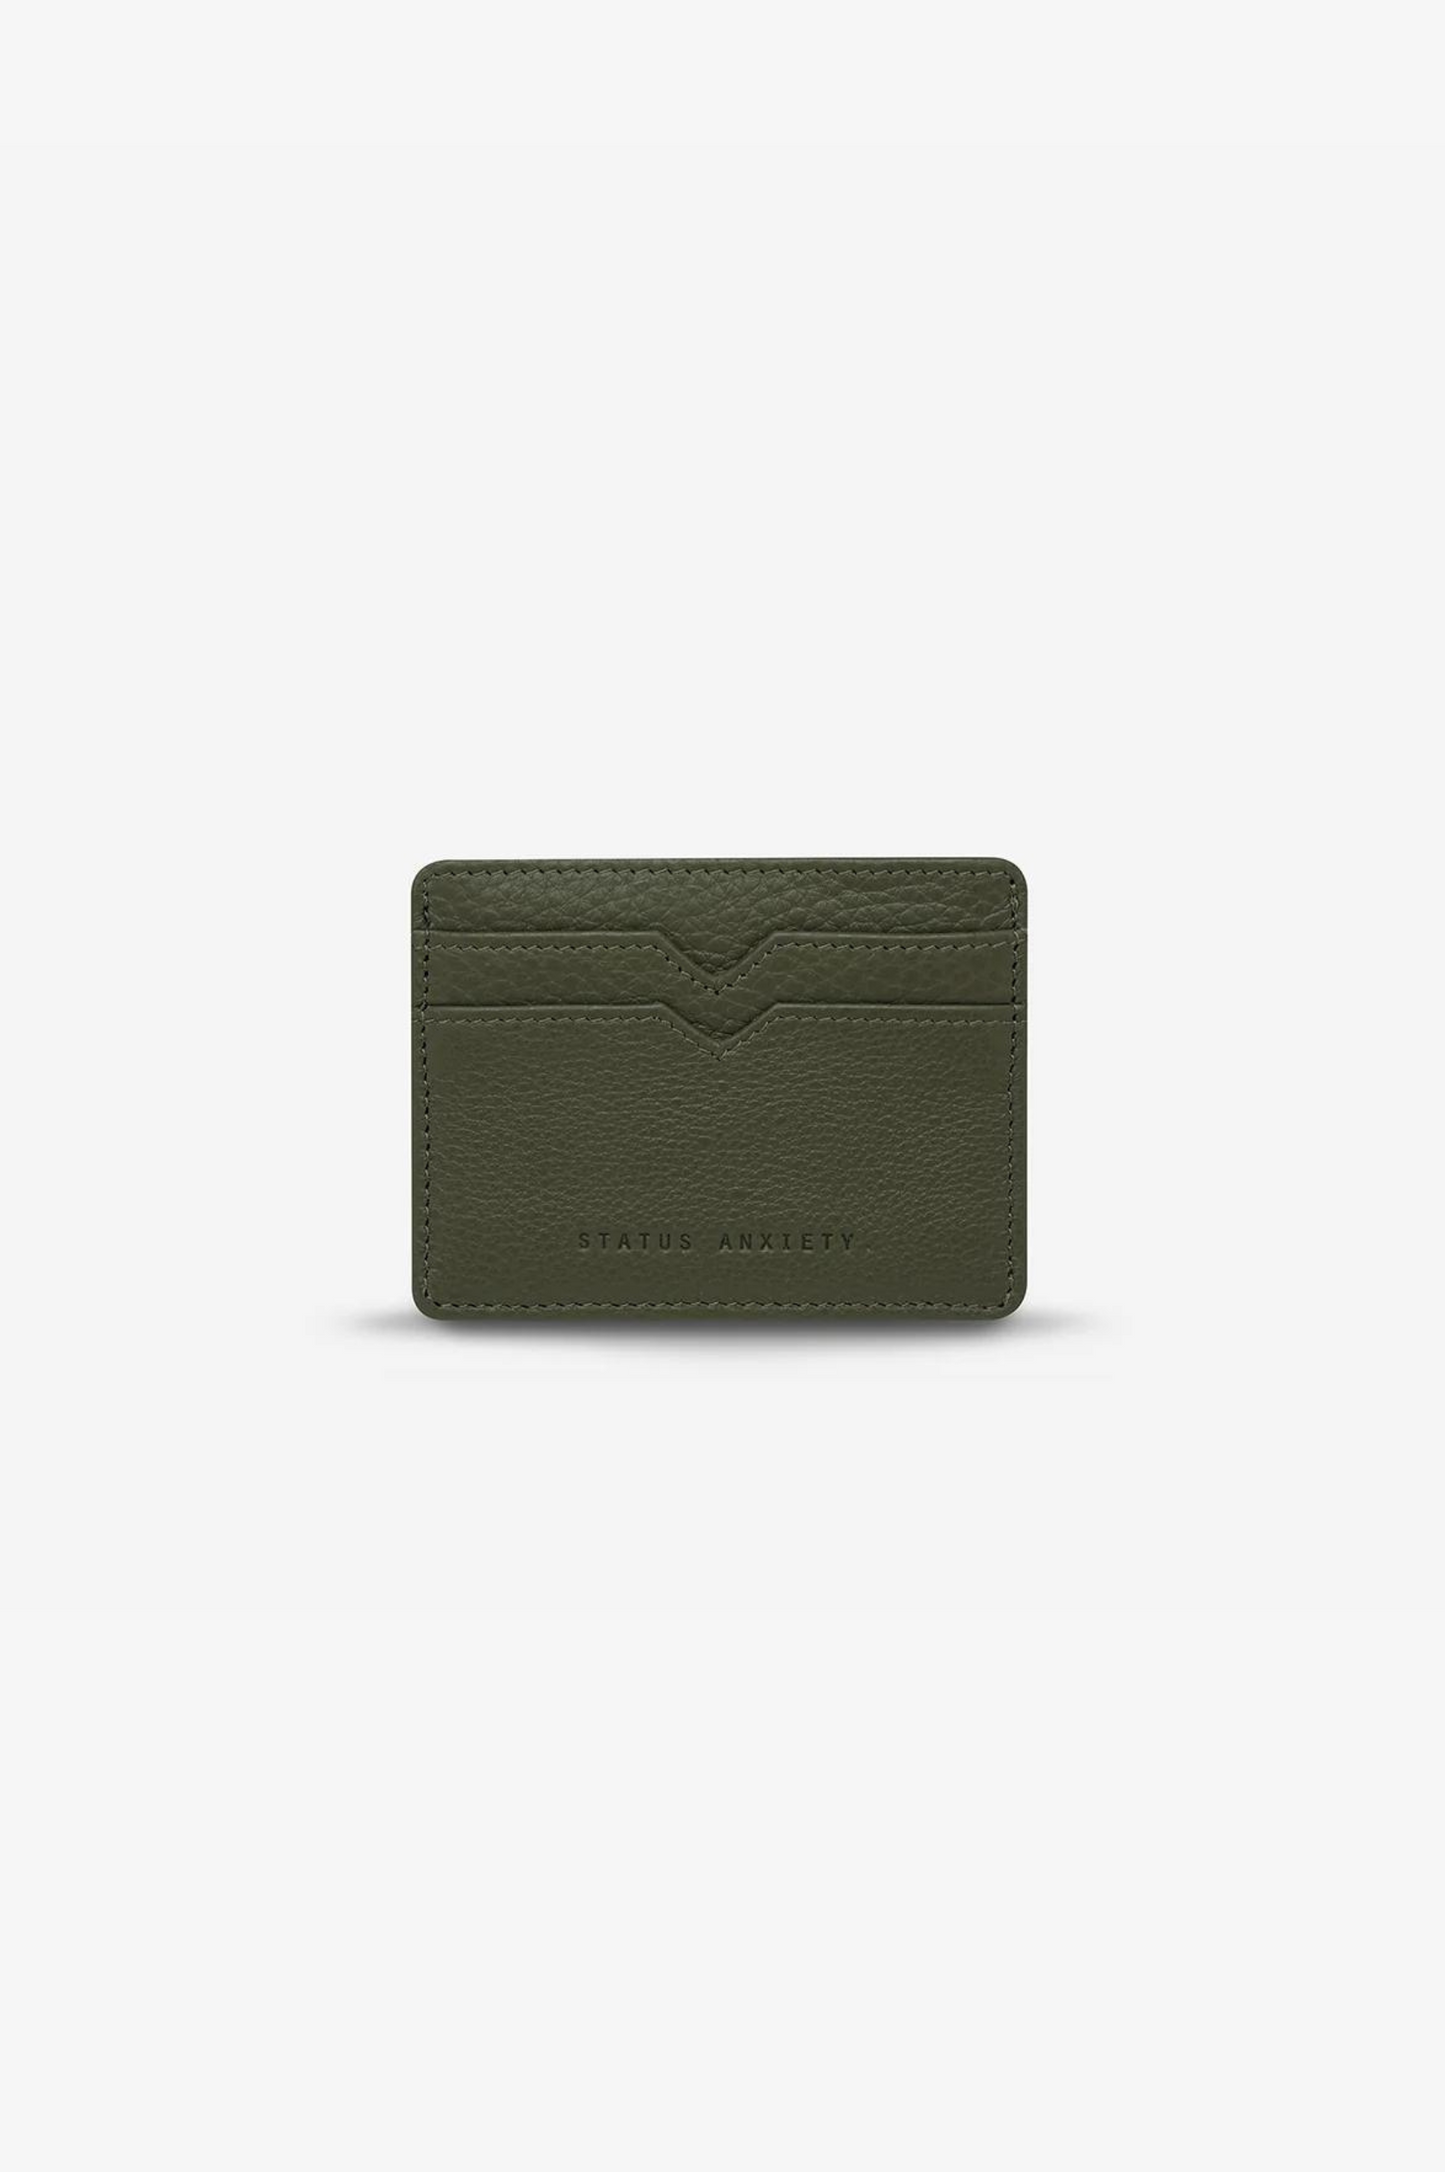 TOGETHER FOR NOW WALLET (Khaki)